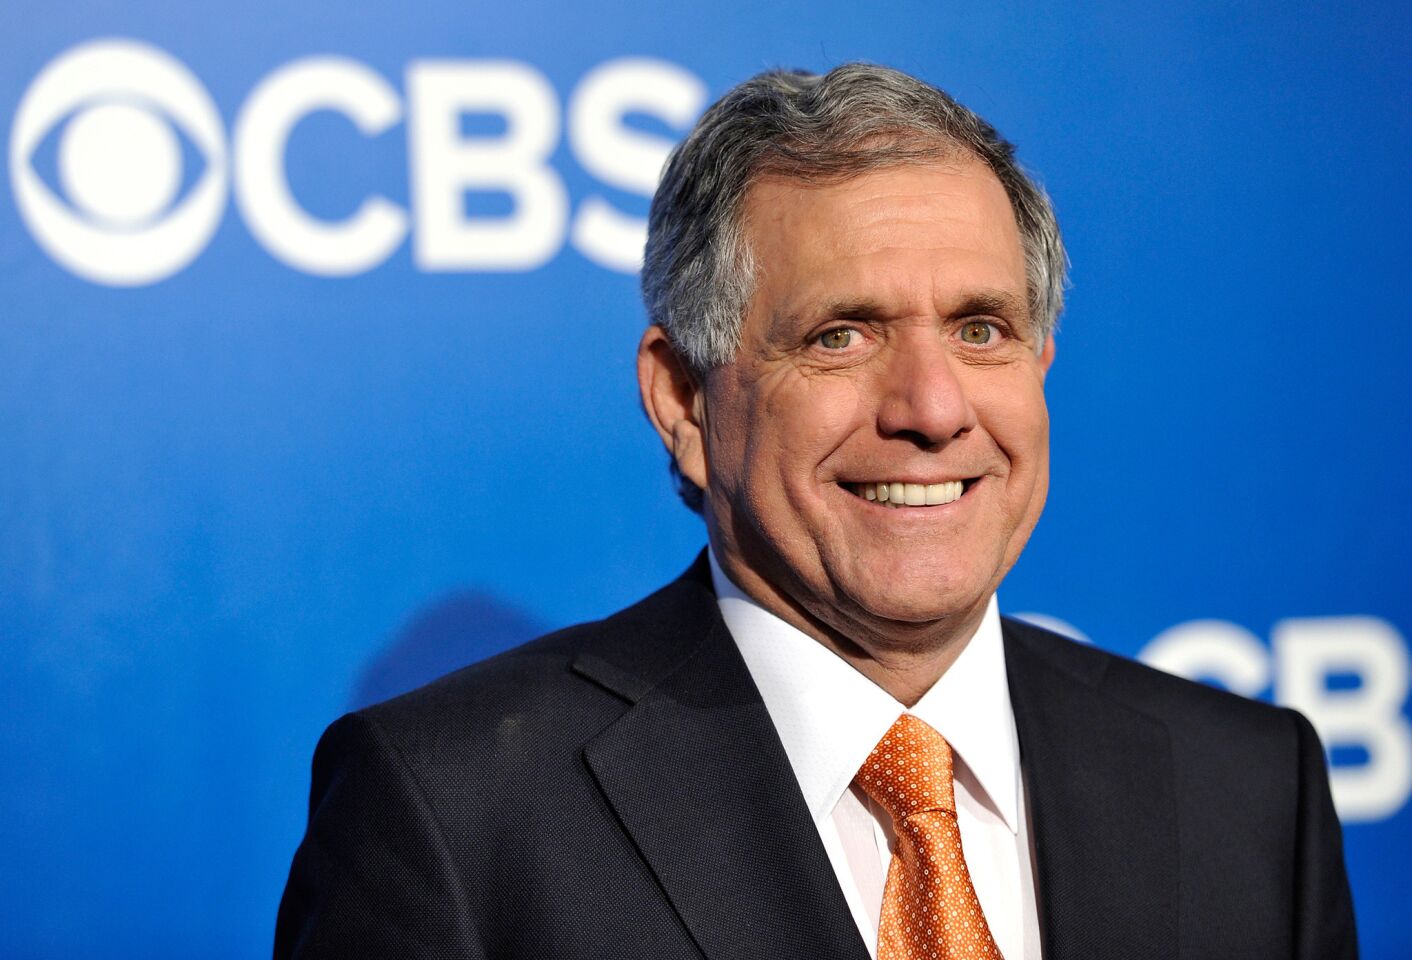 Moonves, chief executive of CBS Corp., received a compensation package of $66.9 million, nearly 8% higher than the $62.2 million in 2012. Moonves collected a $3.5-million salary and a $28.5-million bonus, with stock awards valued at $26.5 million.